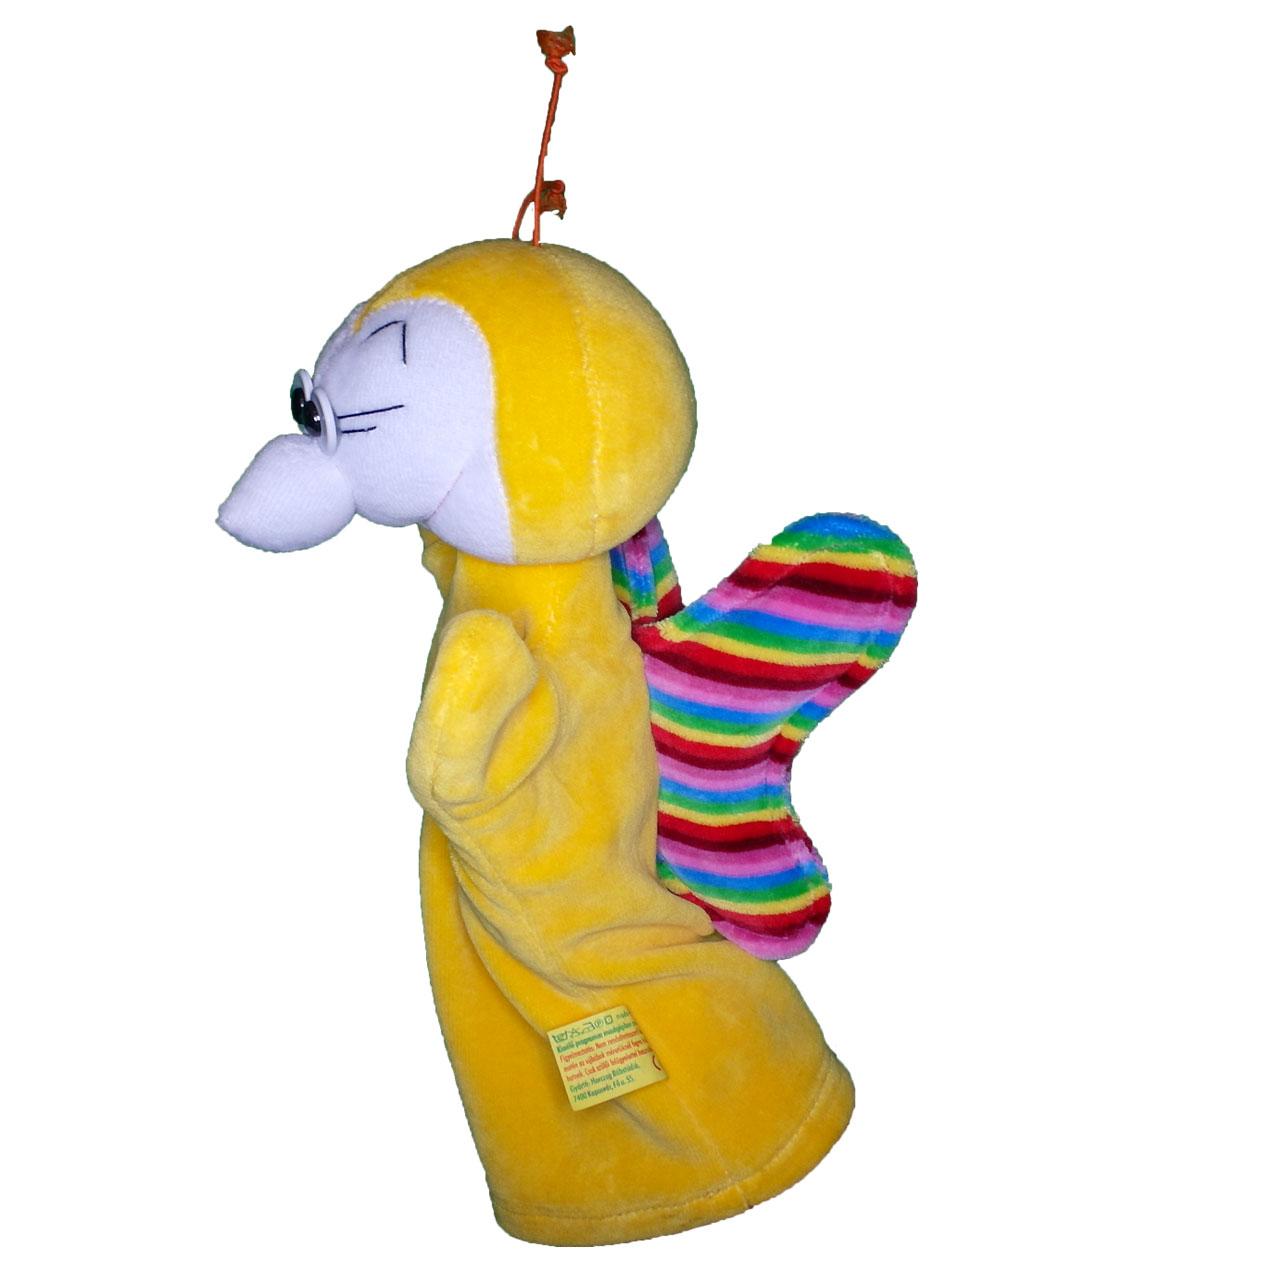 Hand puppet butterfly yellow-orange